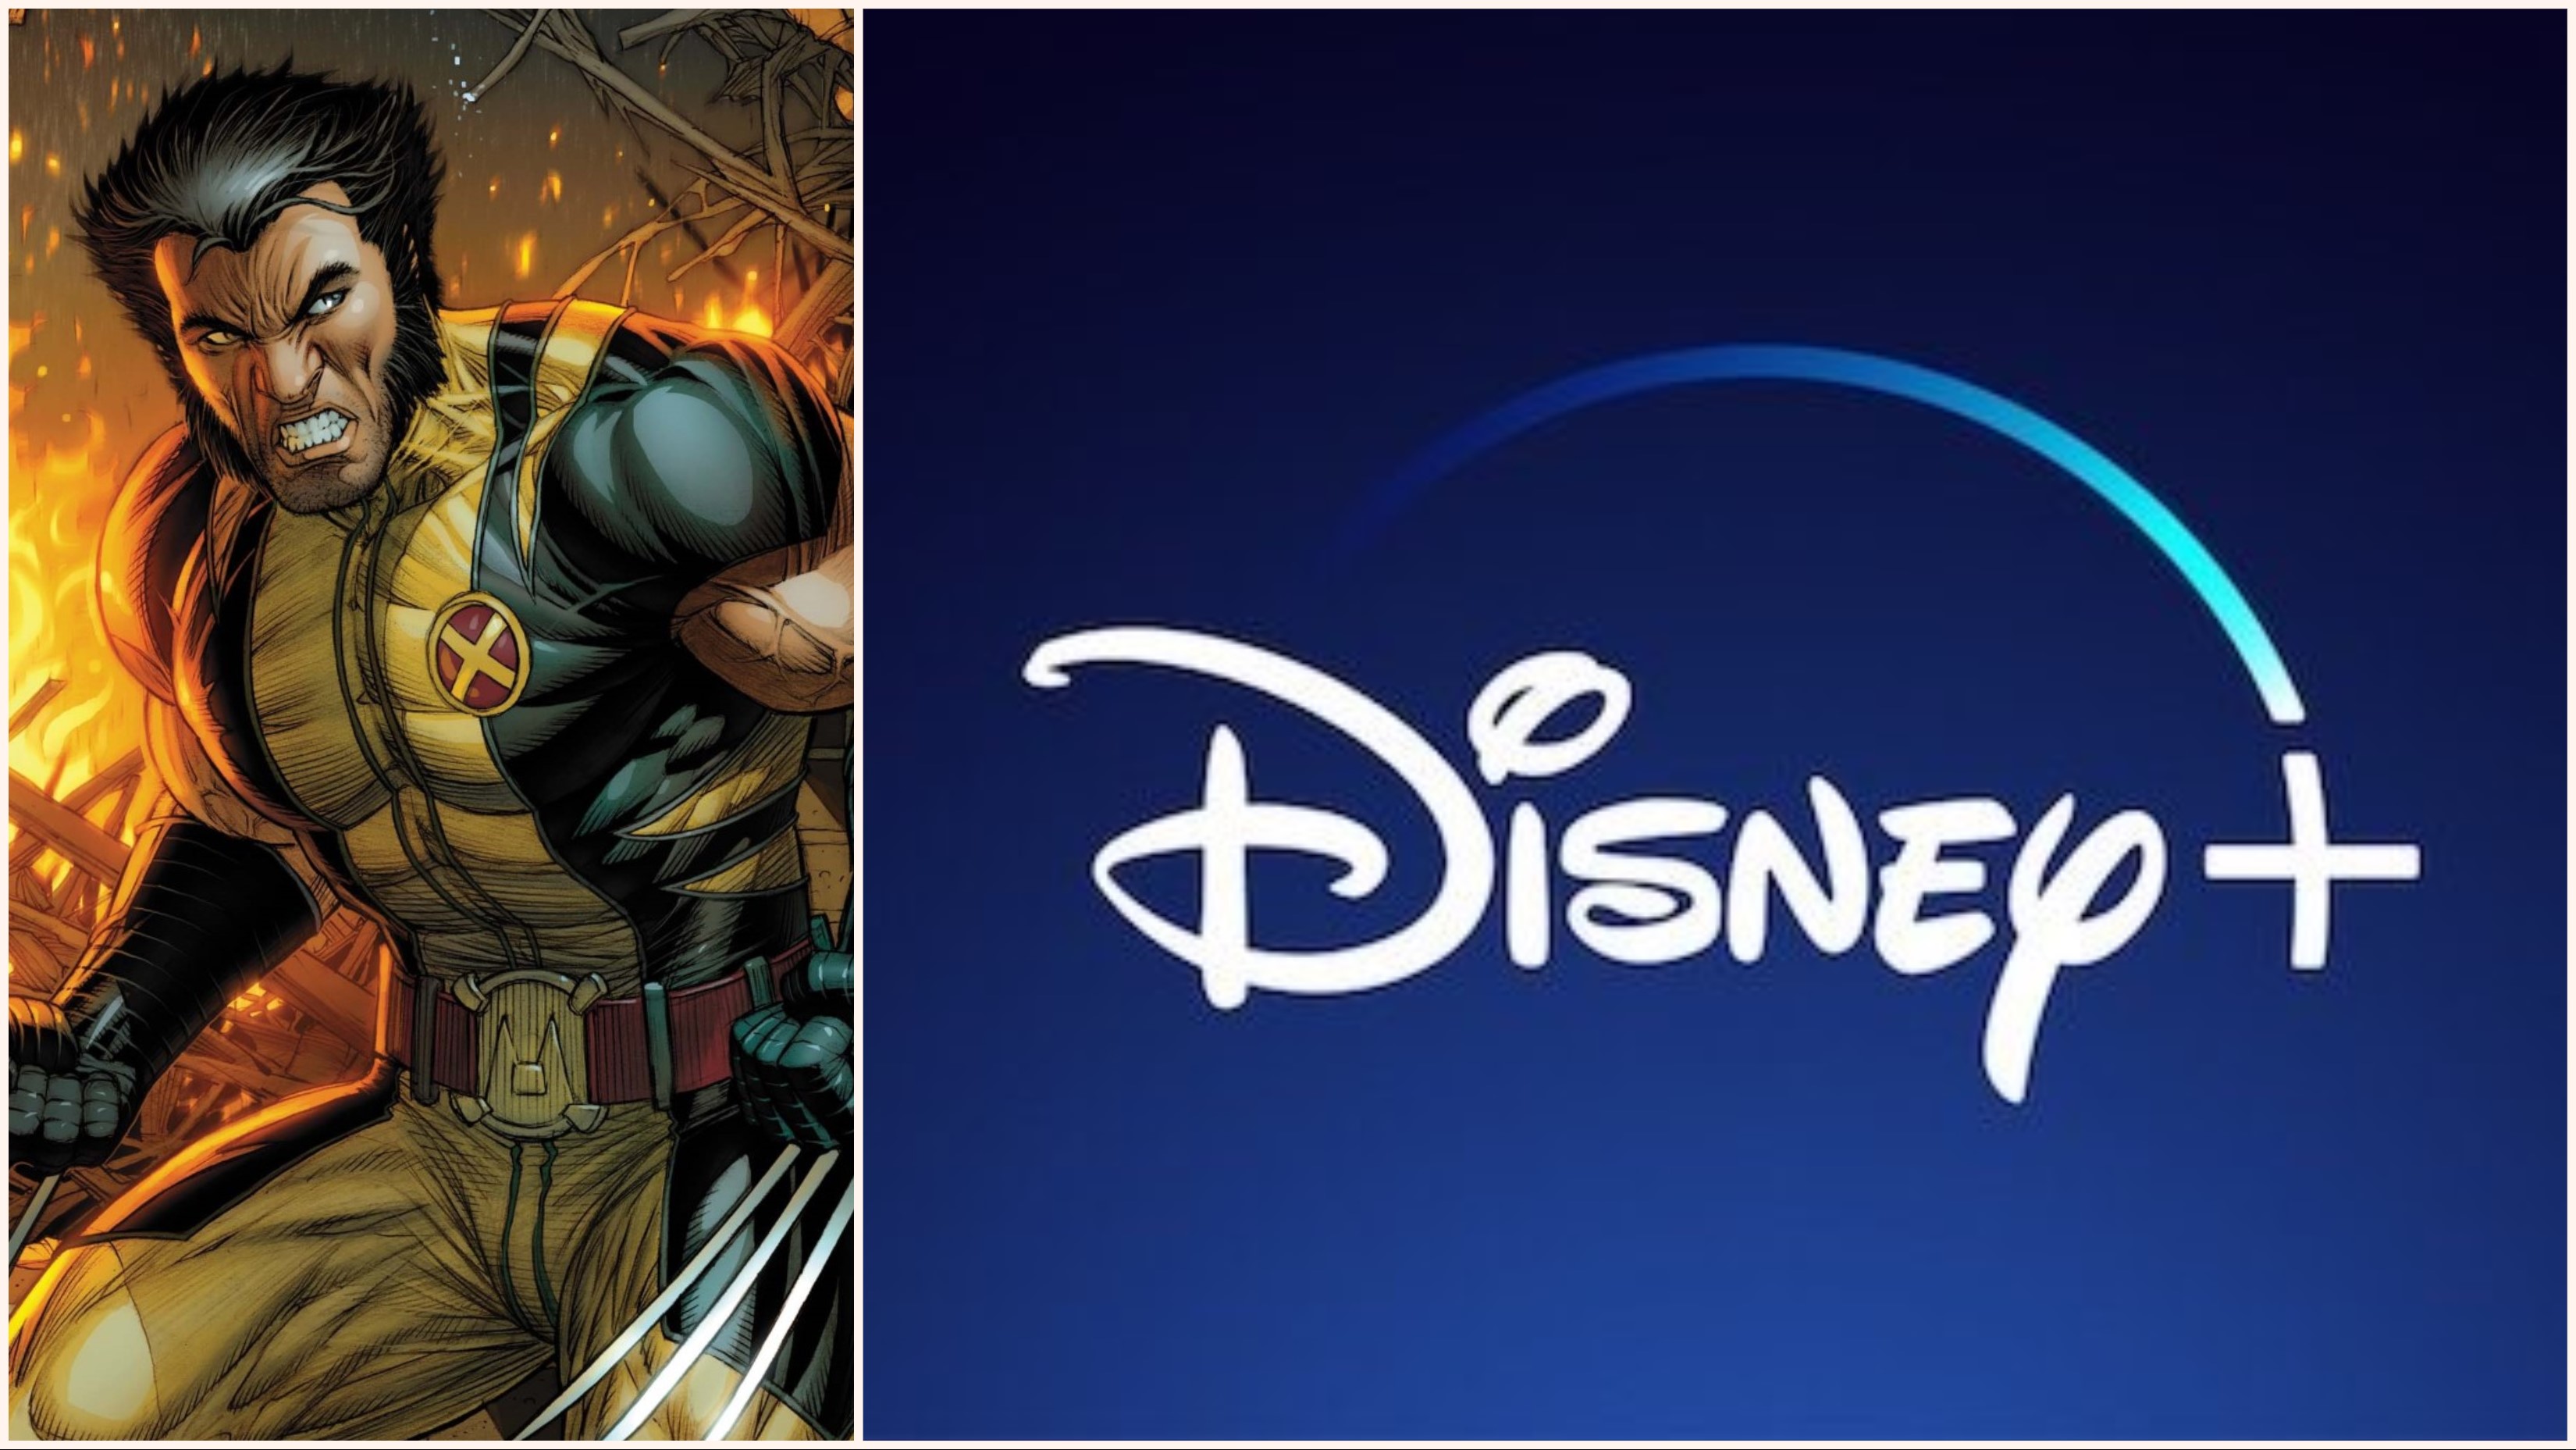 Disney+, the new Disney streaming service, is planning multiple Marvel shows based on X-Men properties they've acquired from Fox.